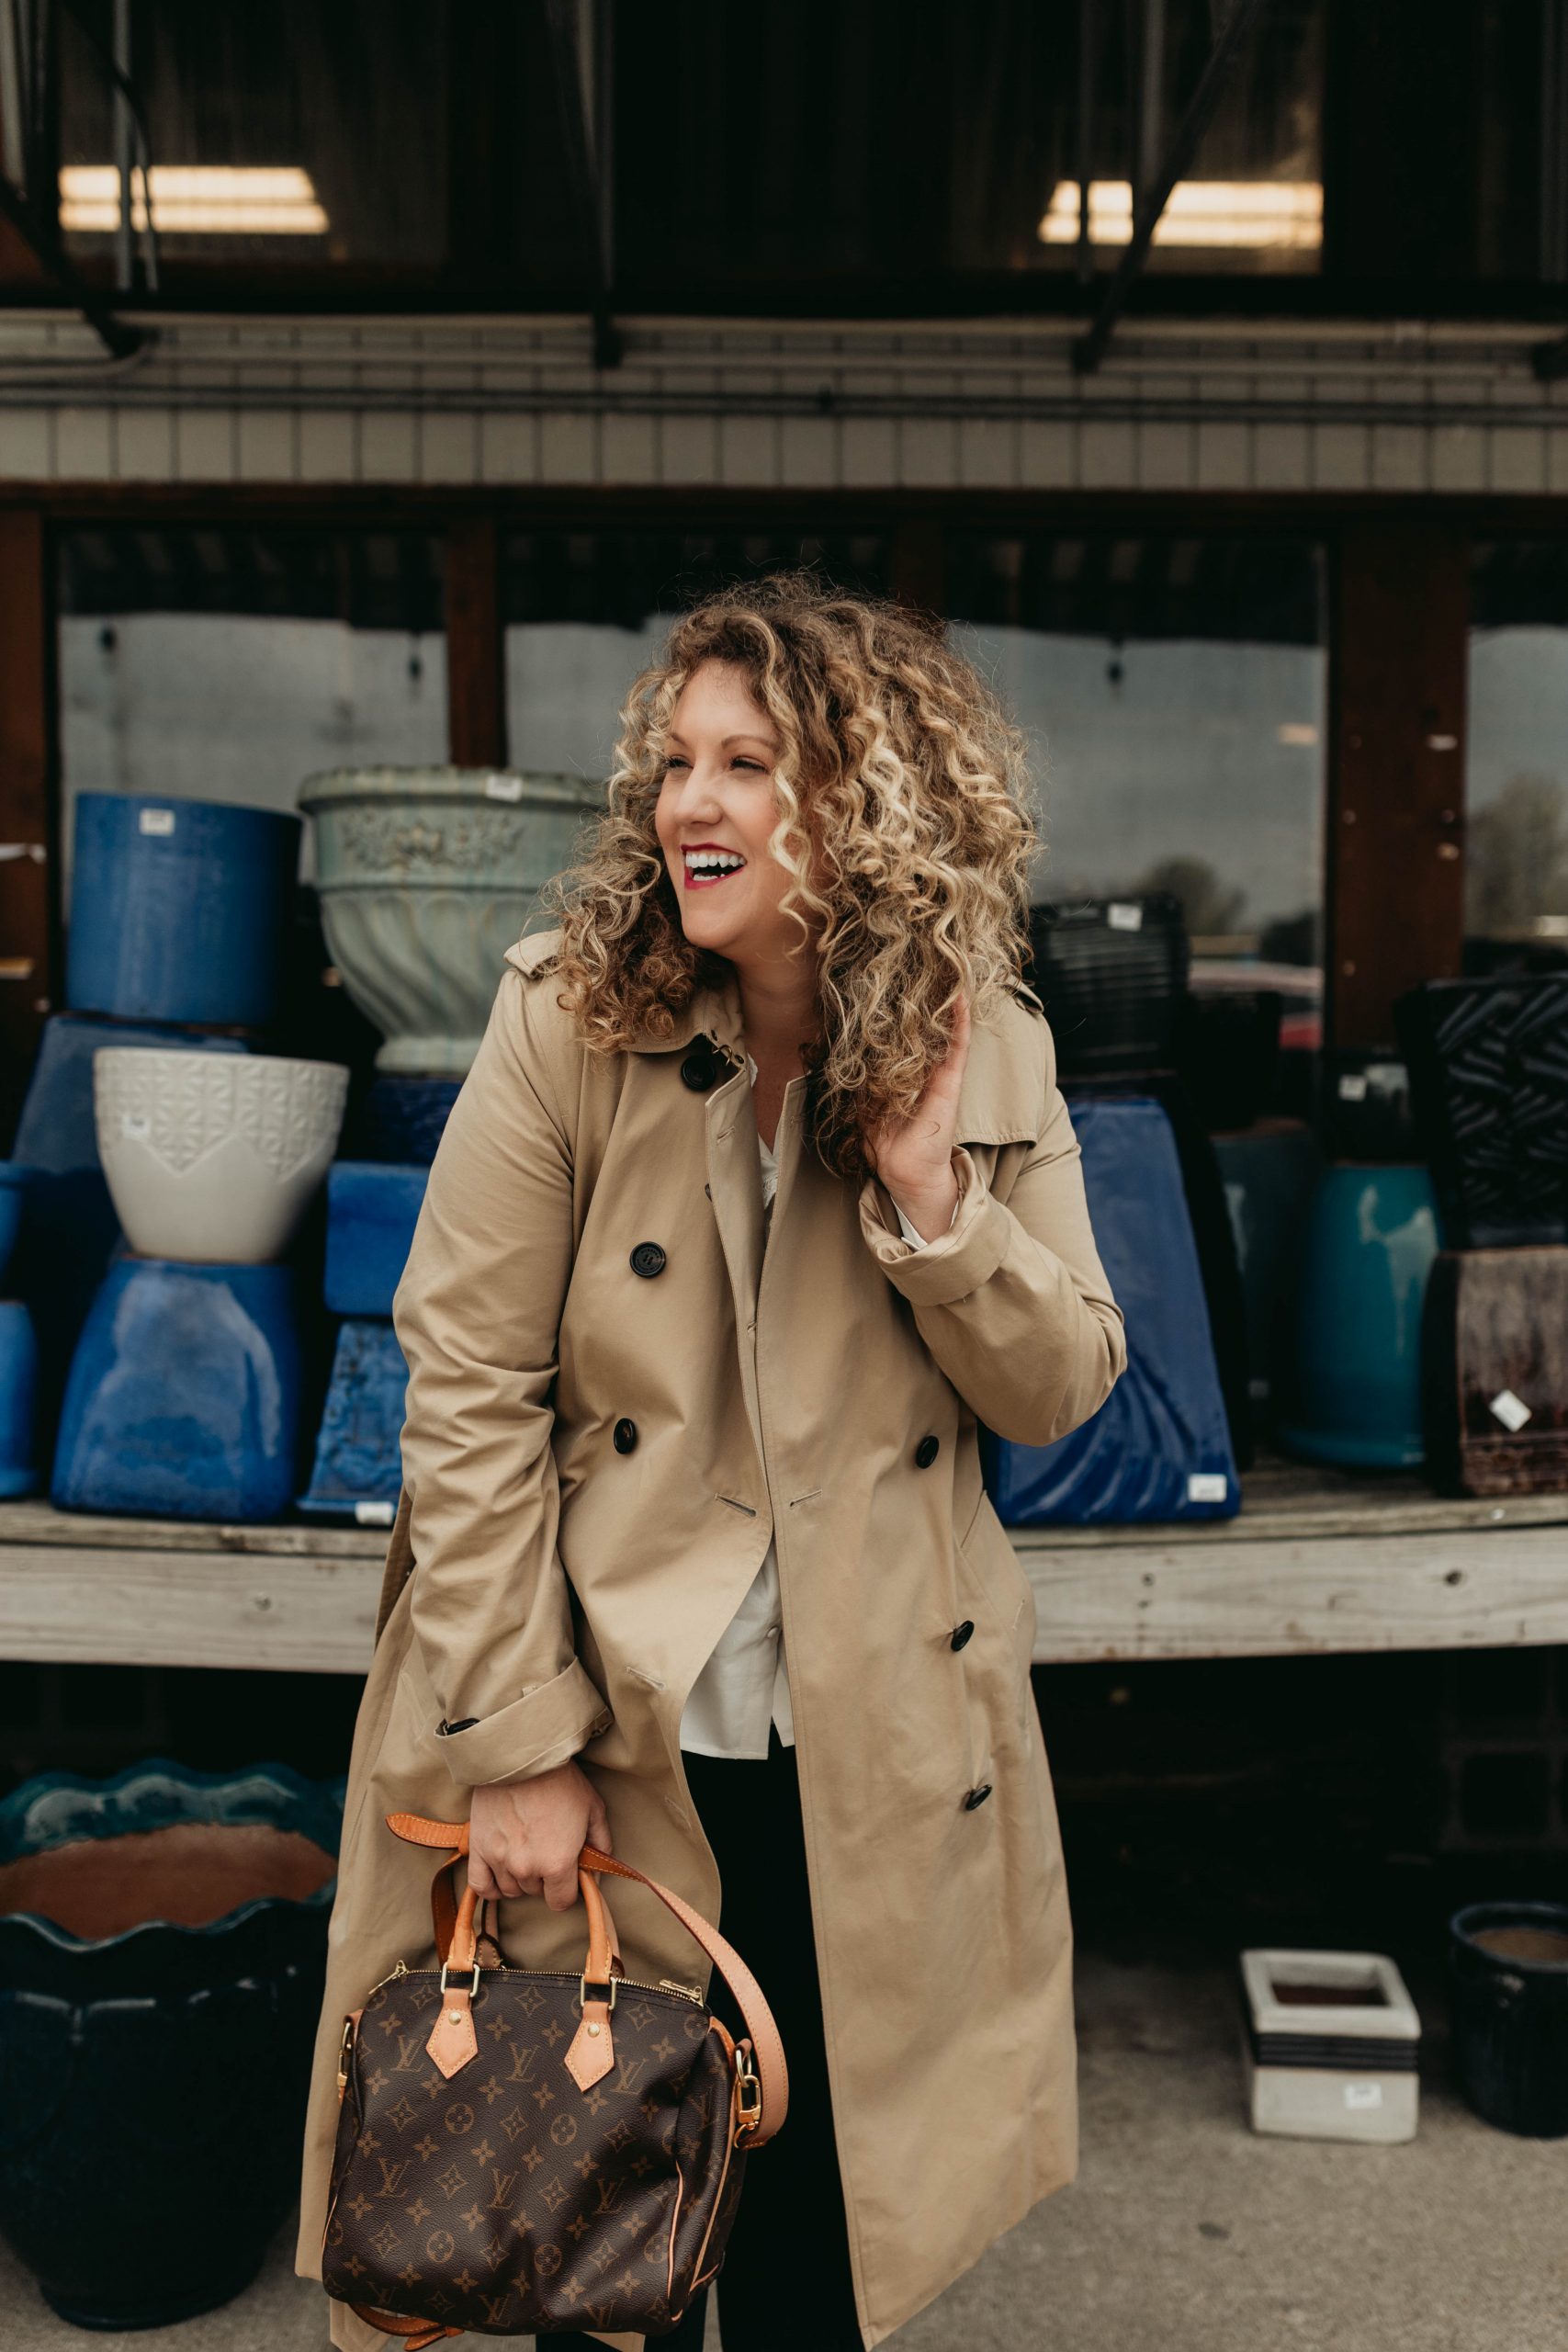 Banket toonhoogte Kiezelsteen Classic Trench, The history and how to style - Abigail Albers